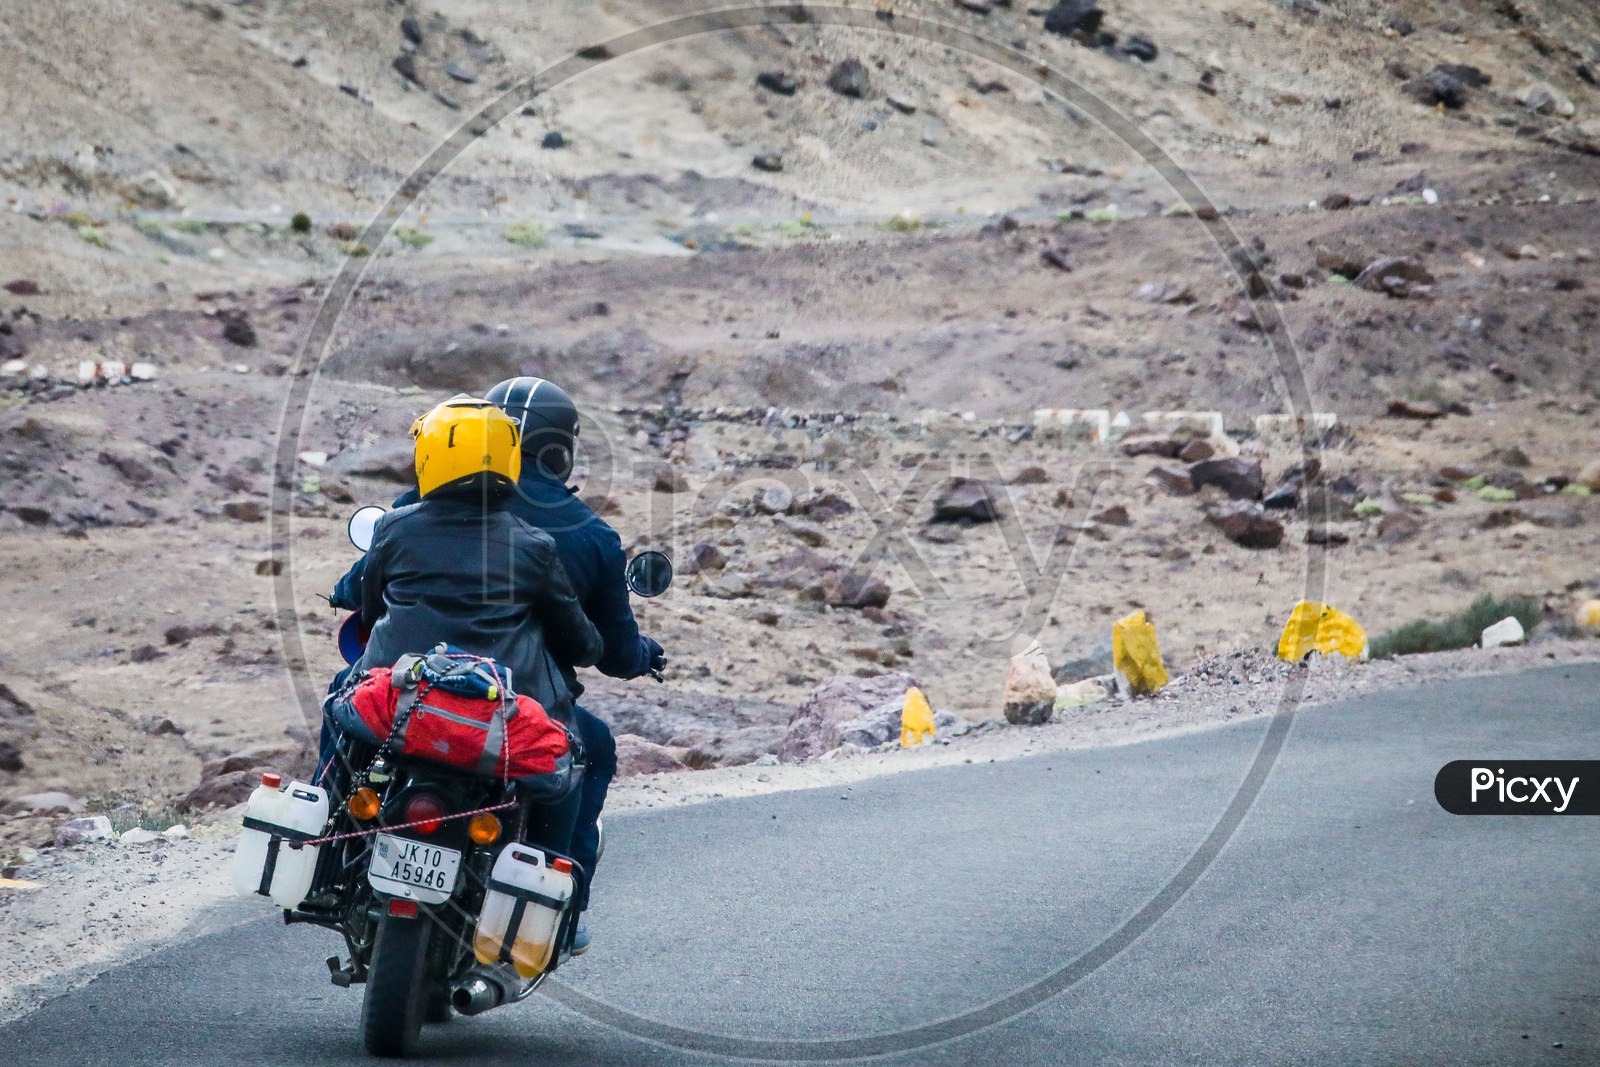 Riders on the motorcycle on the rural road through the mountains